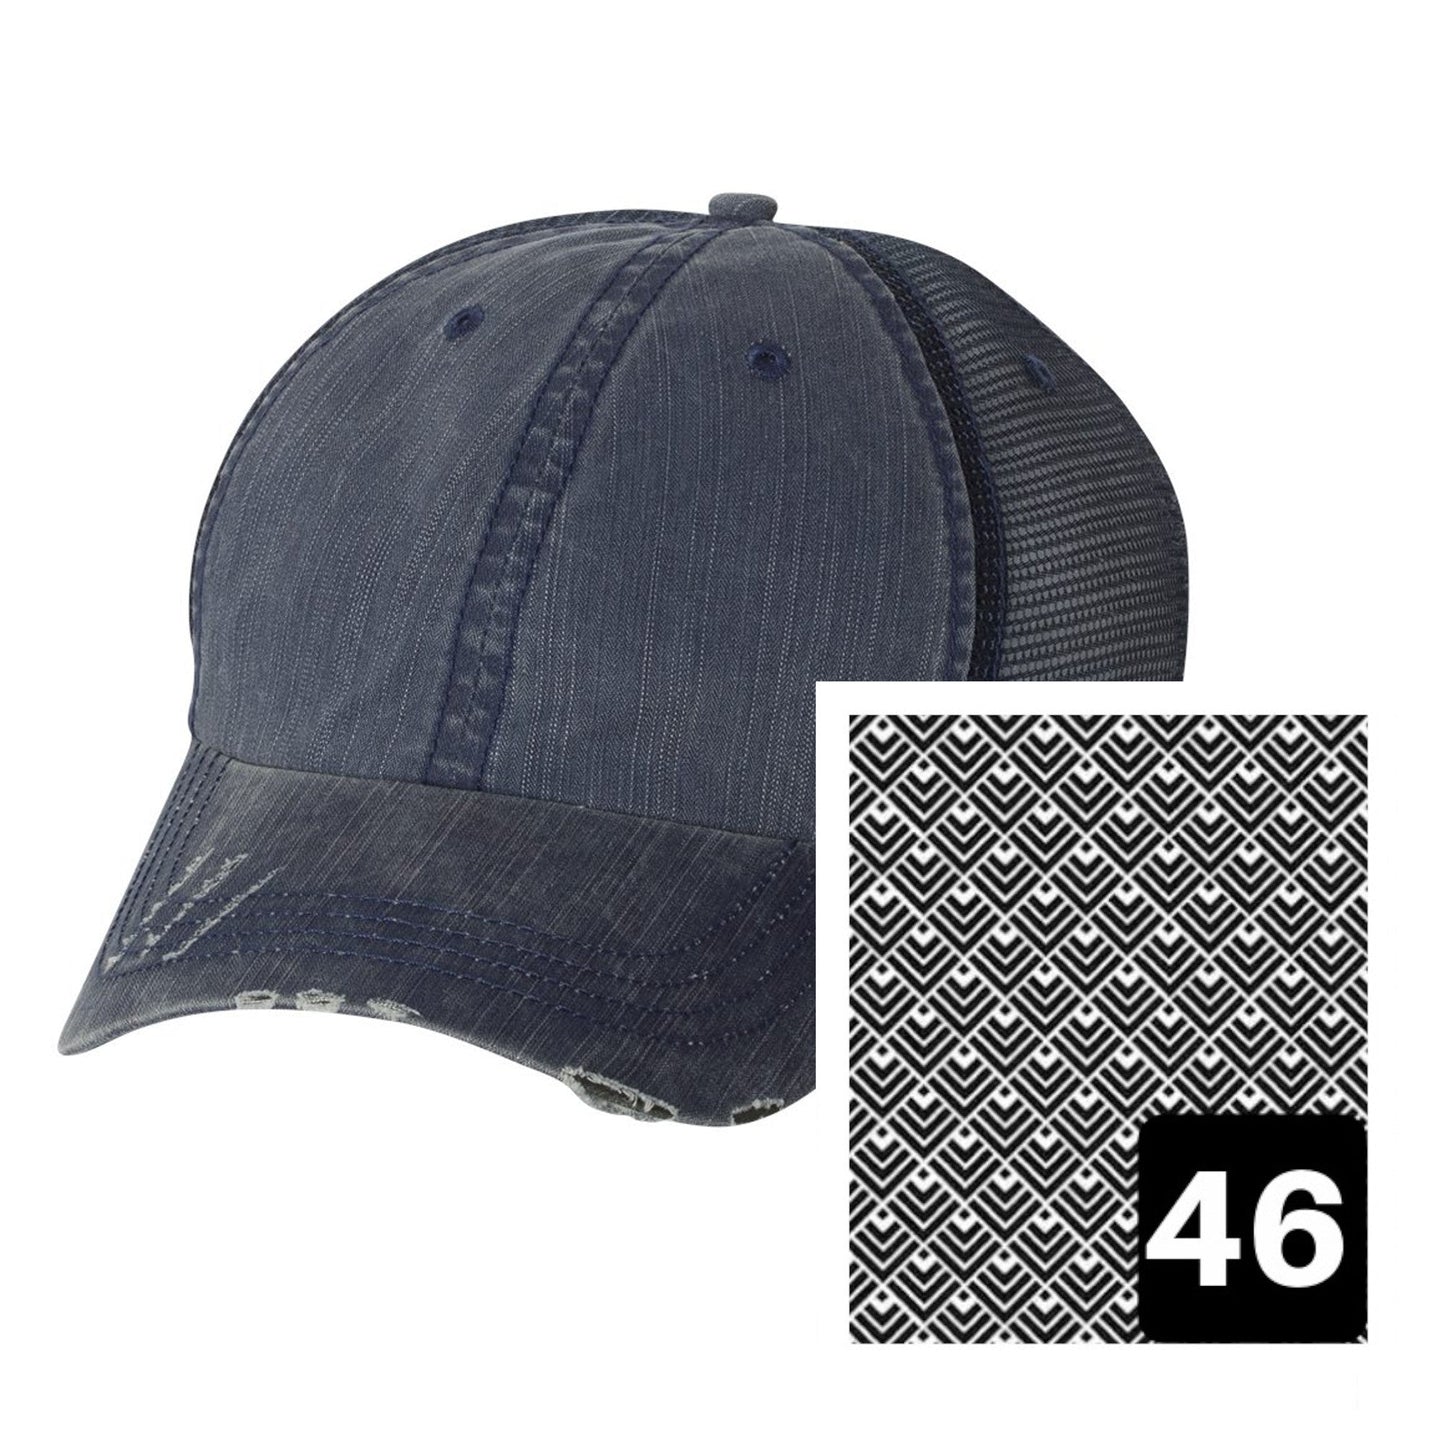 California Hat | Navy Distressed Trucker Cap | Many Fabric Choices